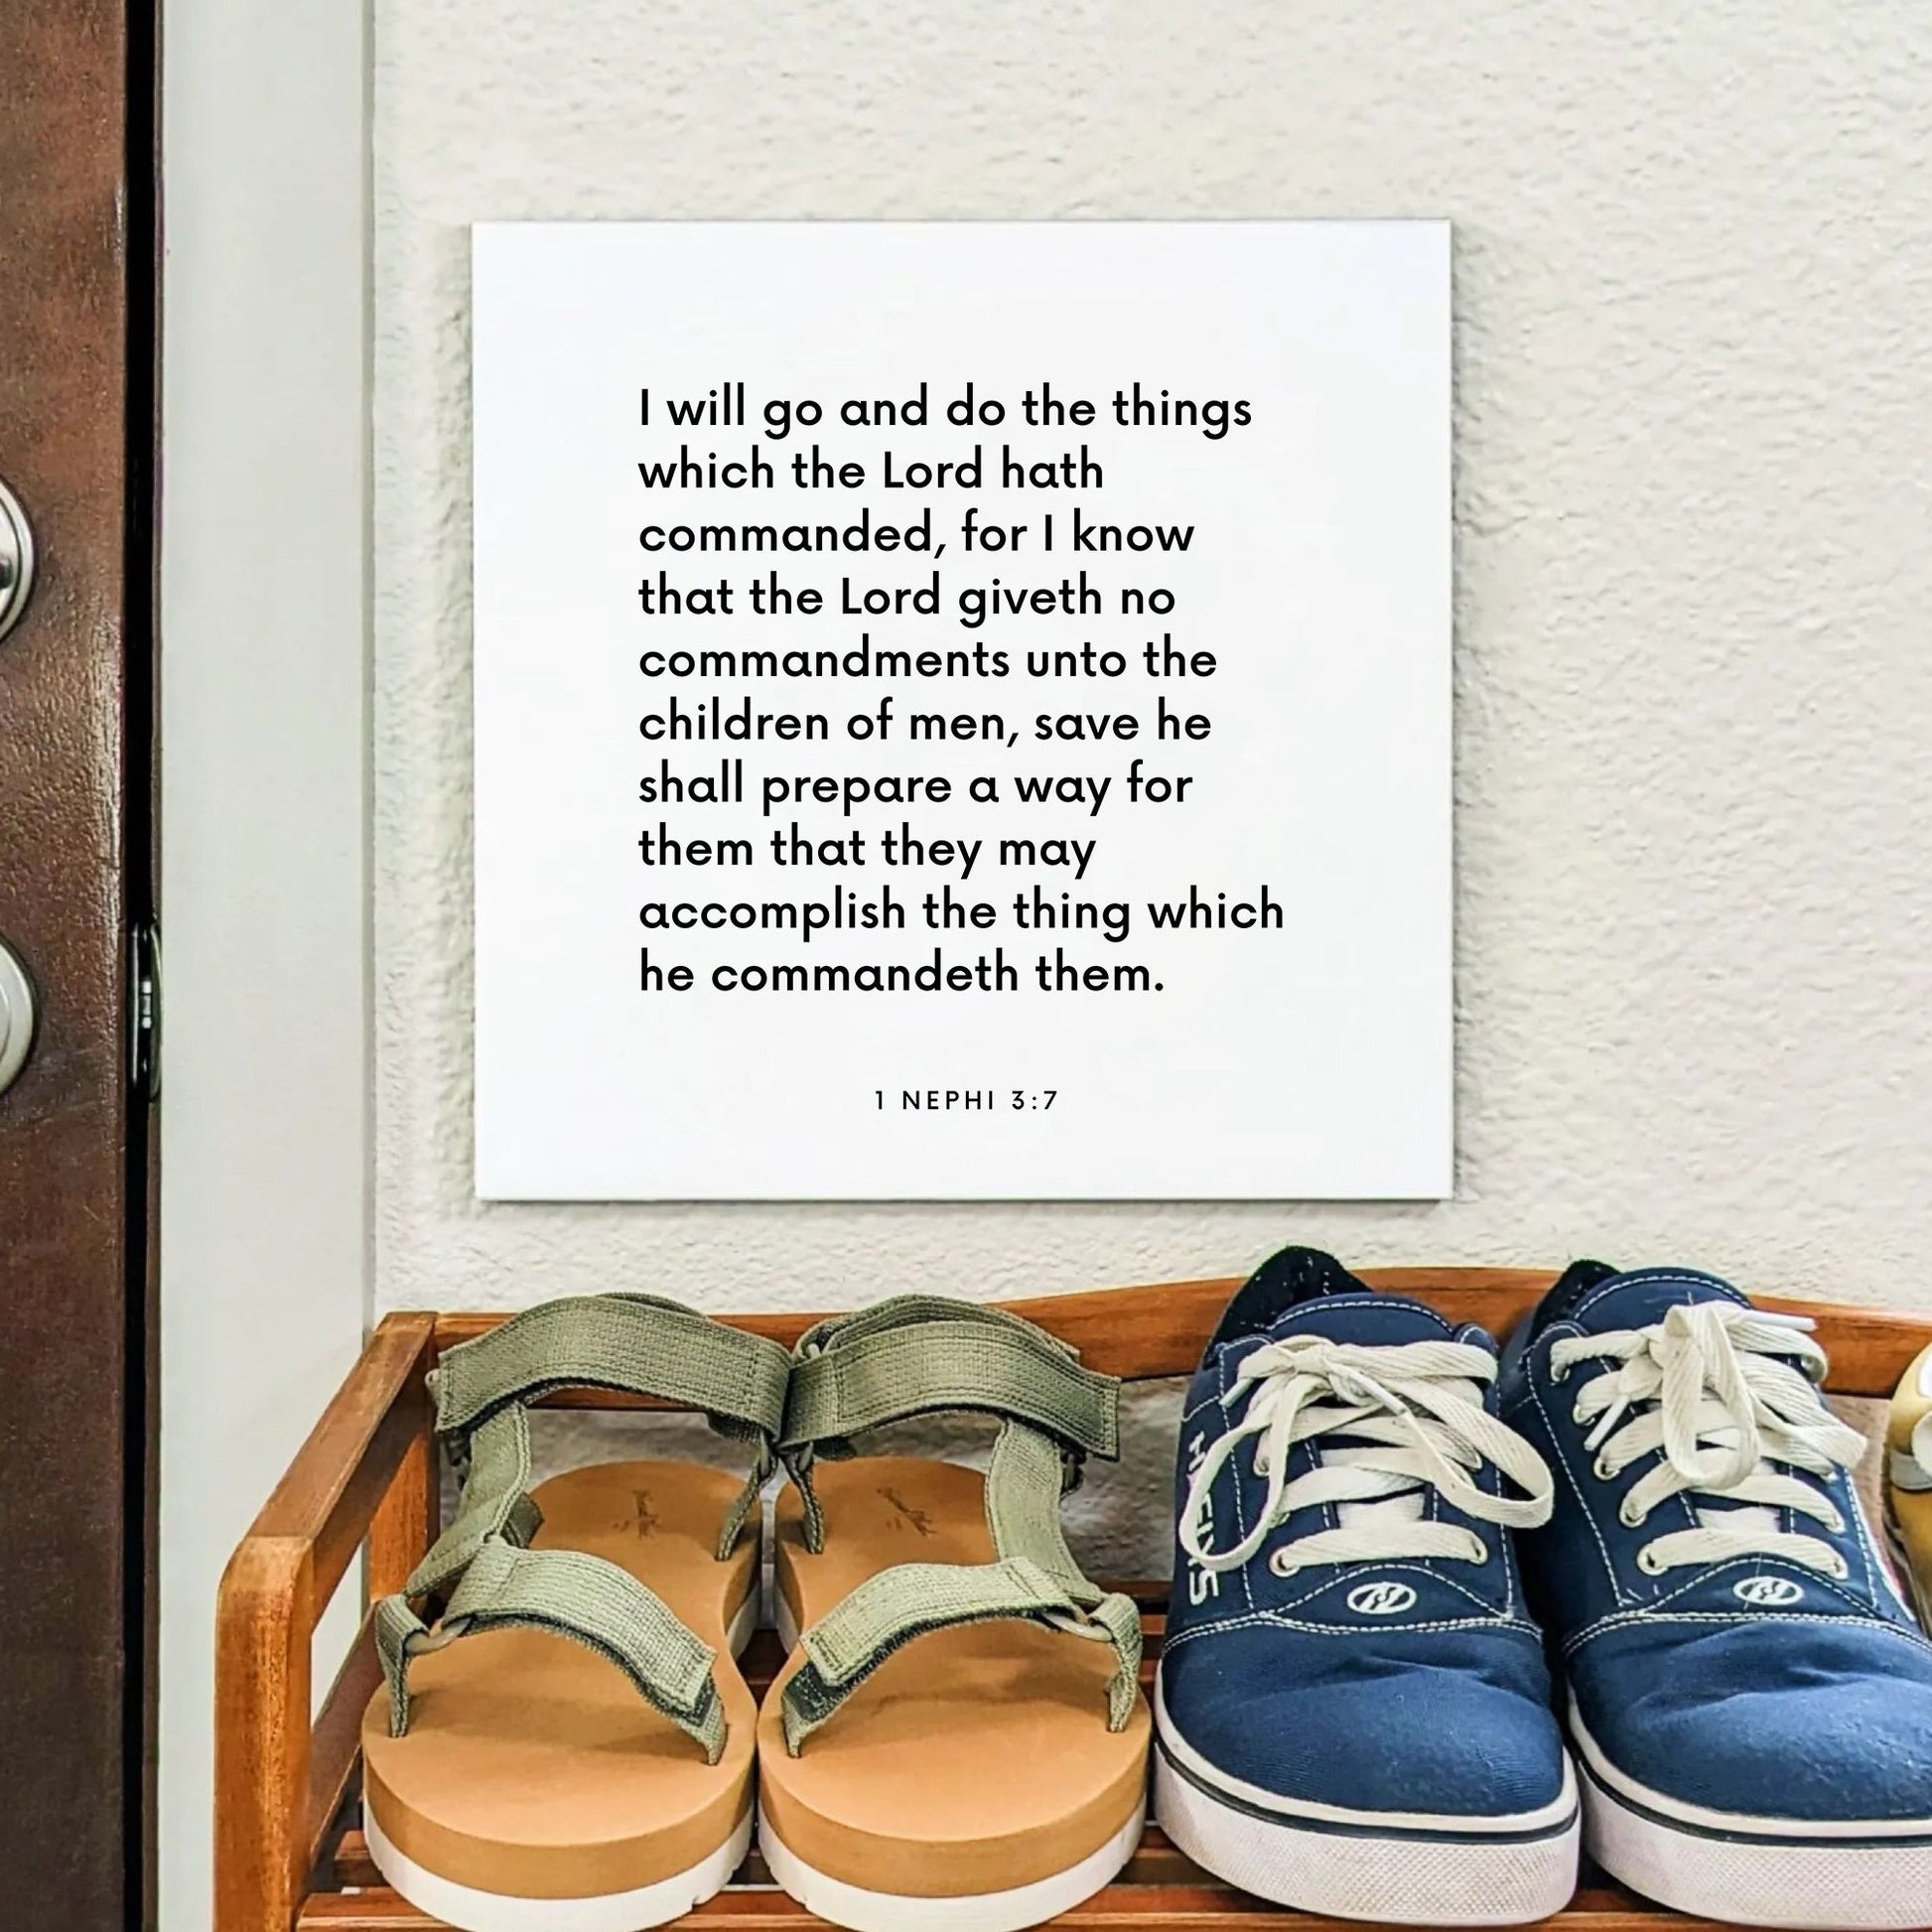 Shoes mouting of the scripture tile for 1 Nephi 3:7 - "I will go and do the things which the Lord hath commanded"